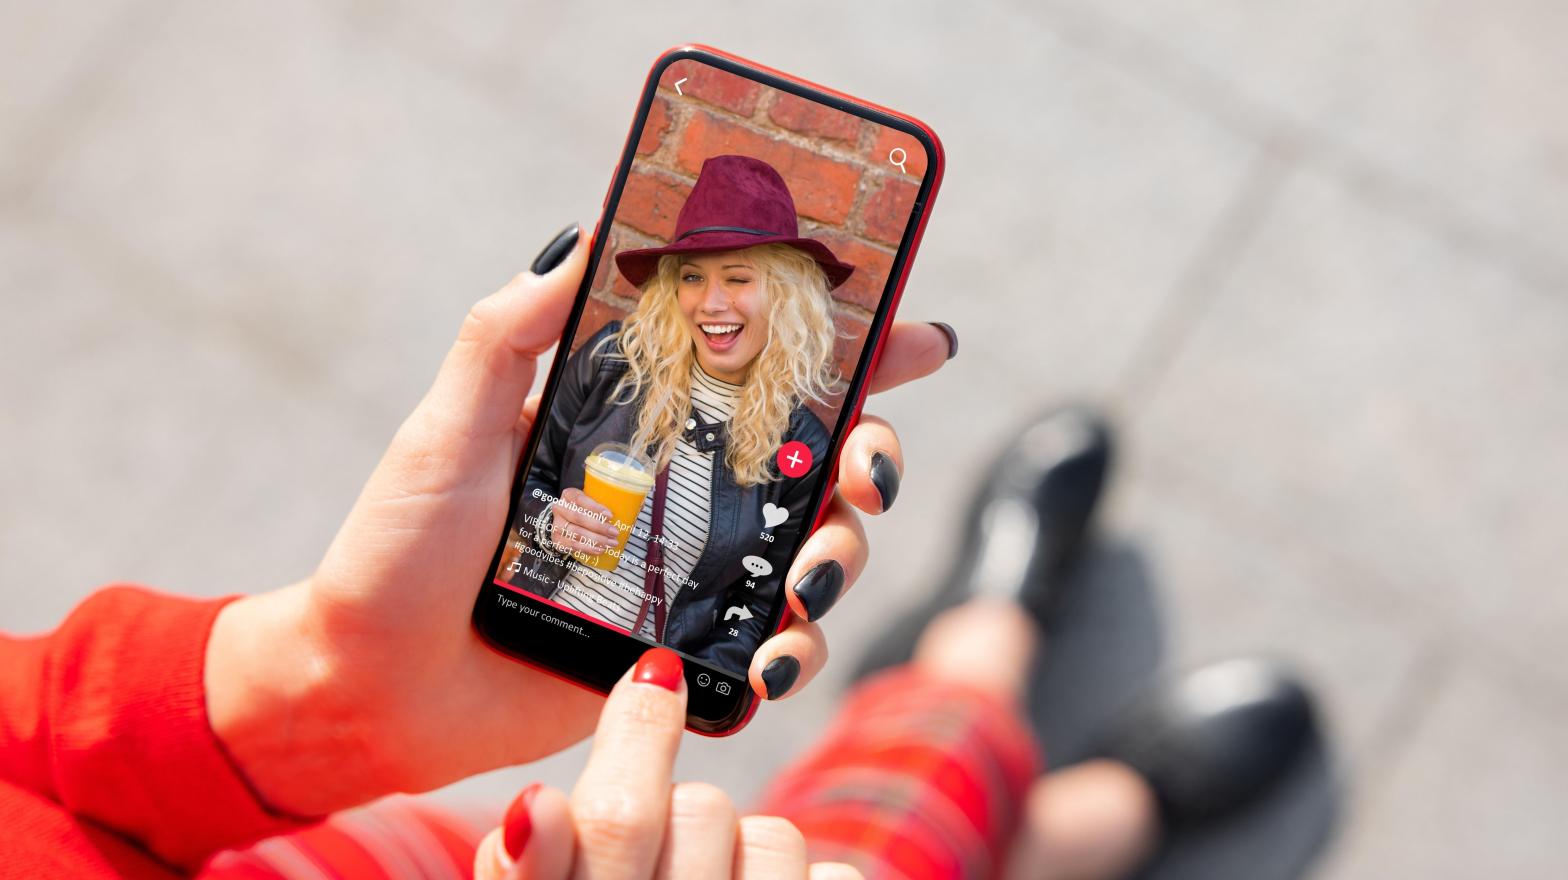 TikTok Might Soon Have Ads With AI-Generated Versions of Popular Creators